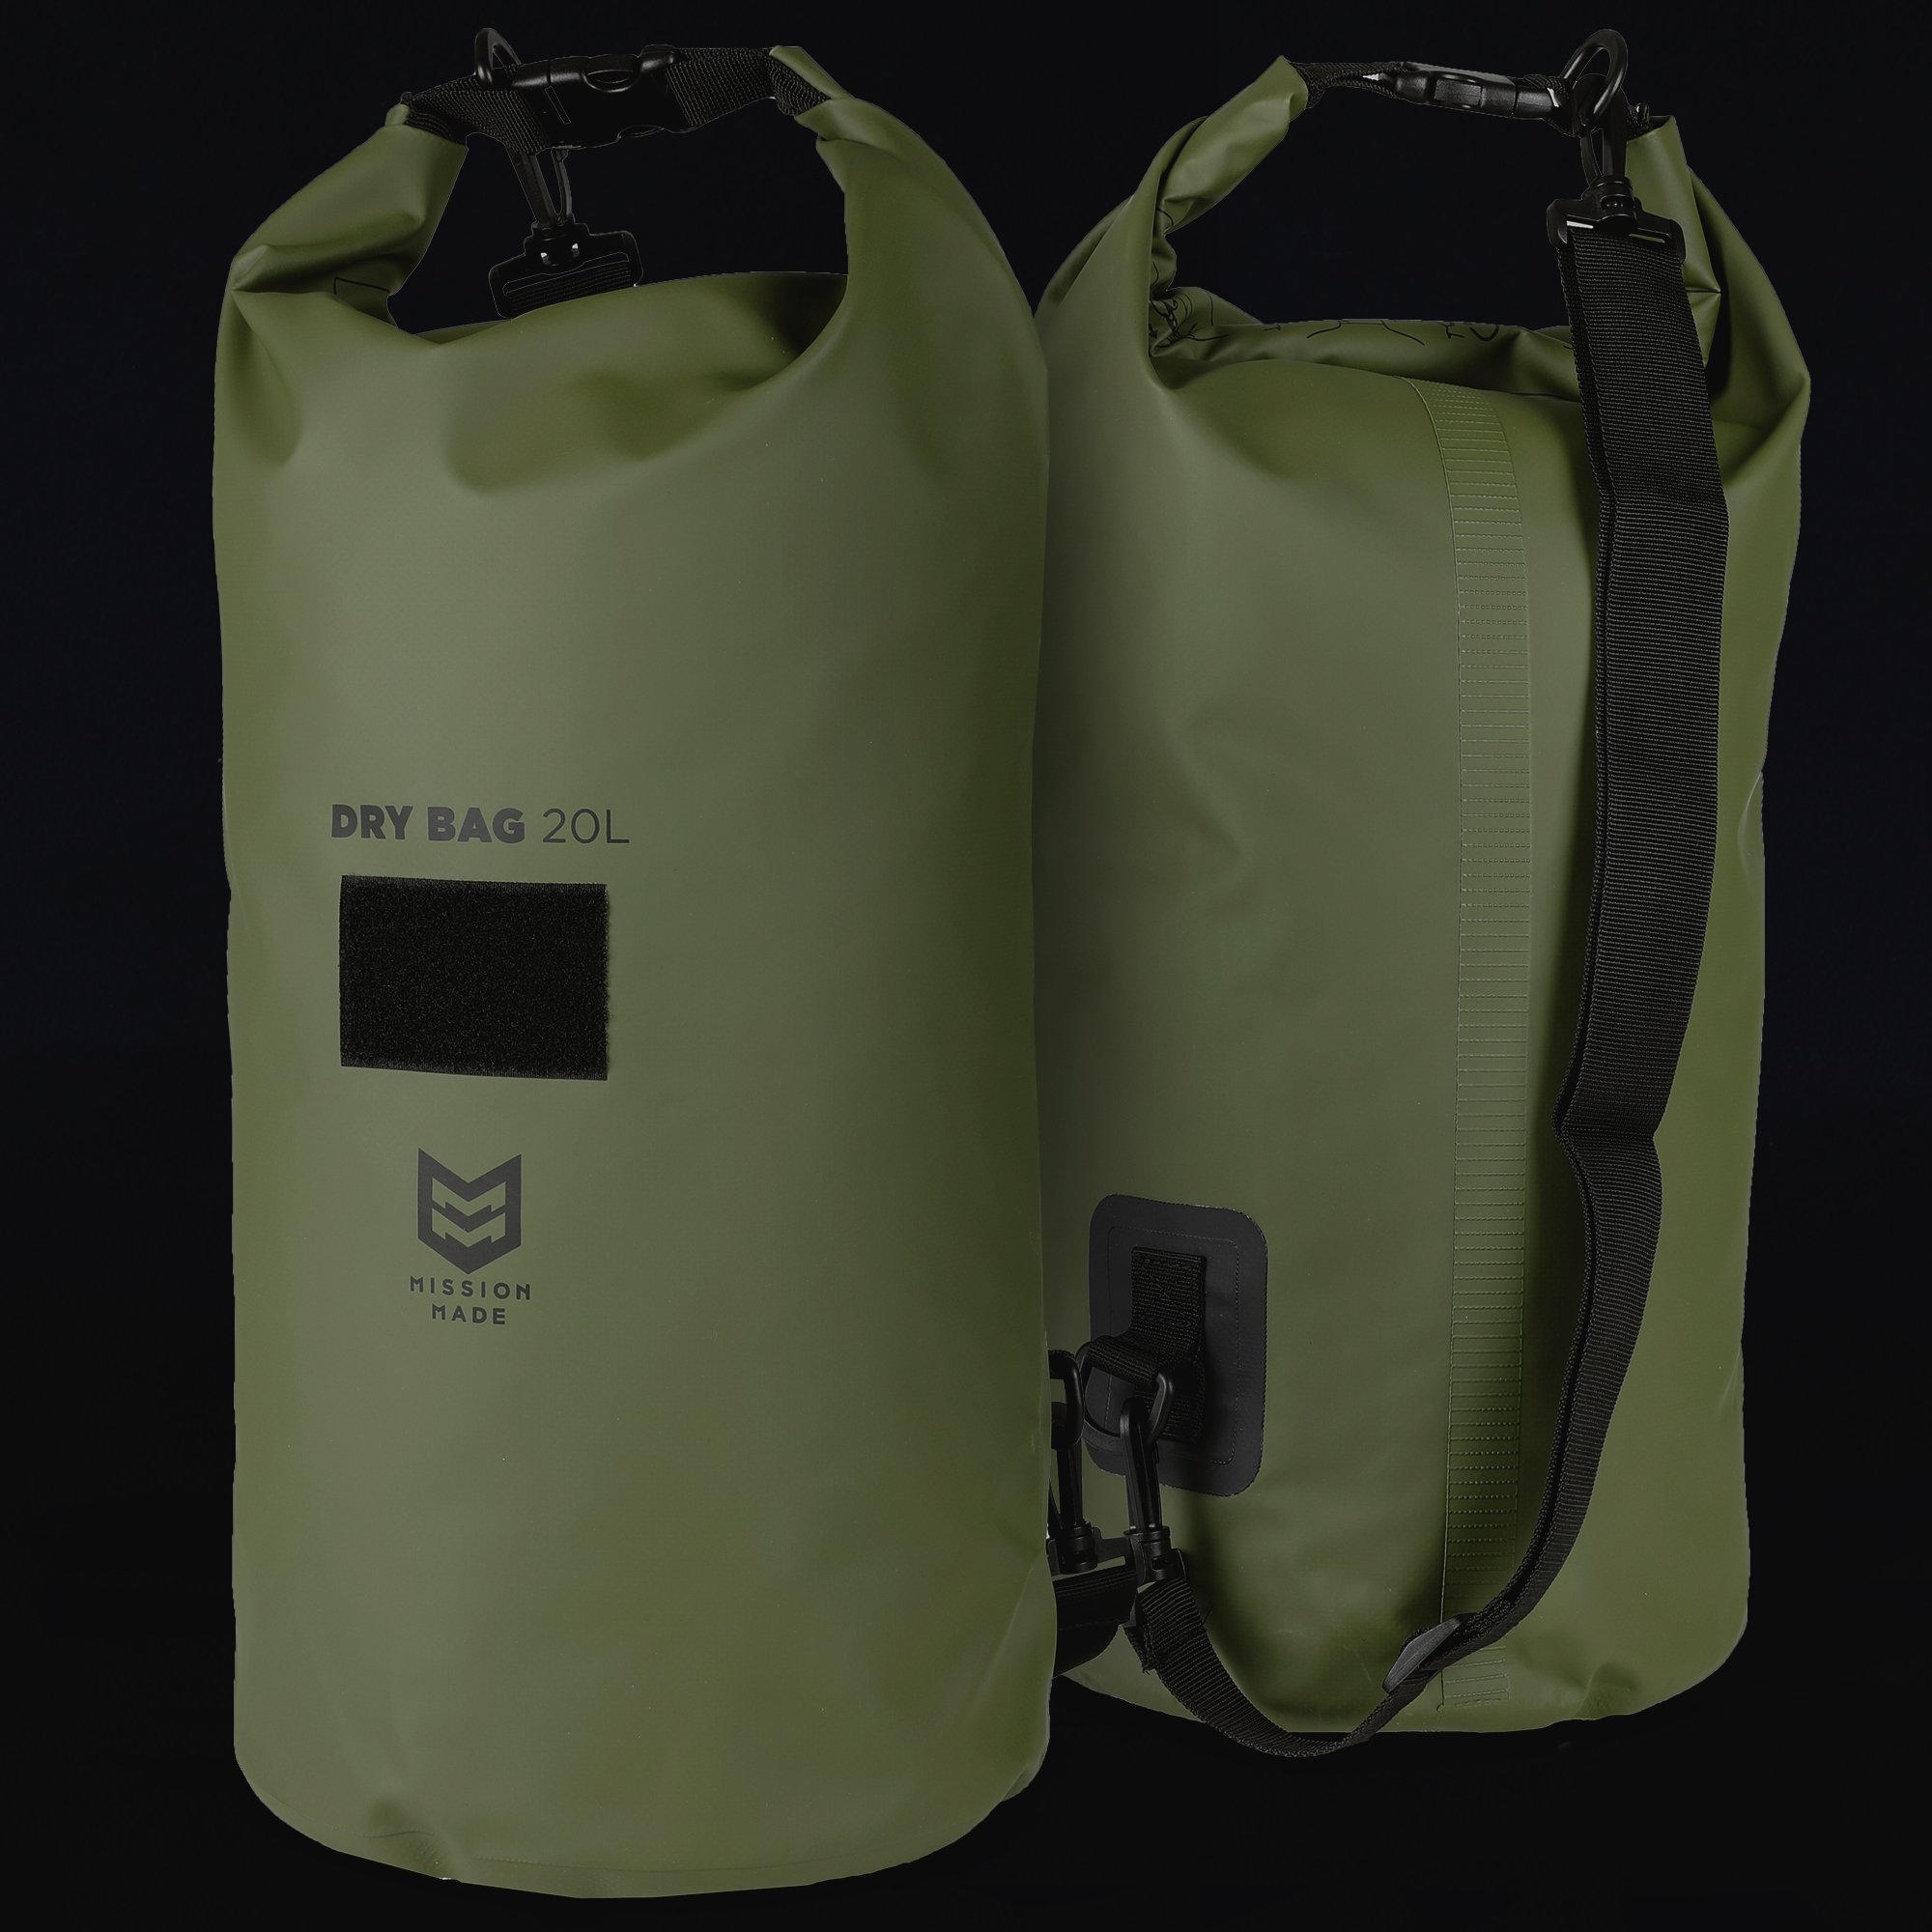 Mission Made Dry Bag 20L | Tactical Gear Superstore | TacticalGear.com